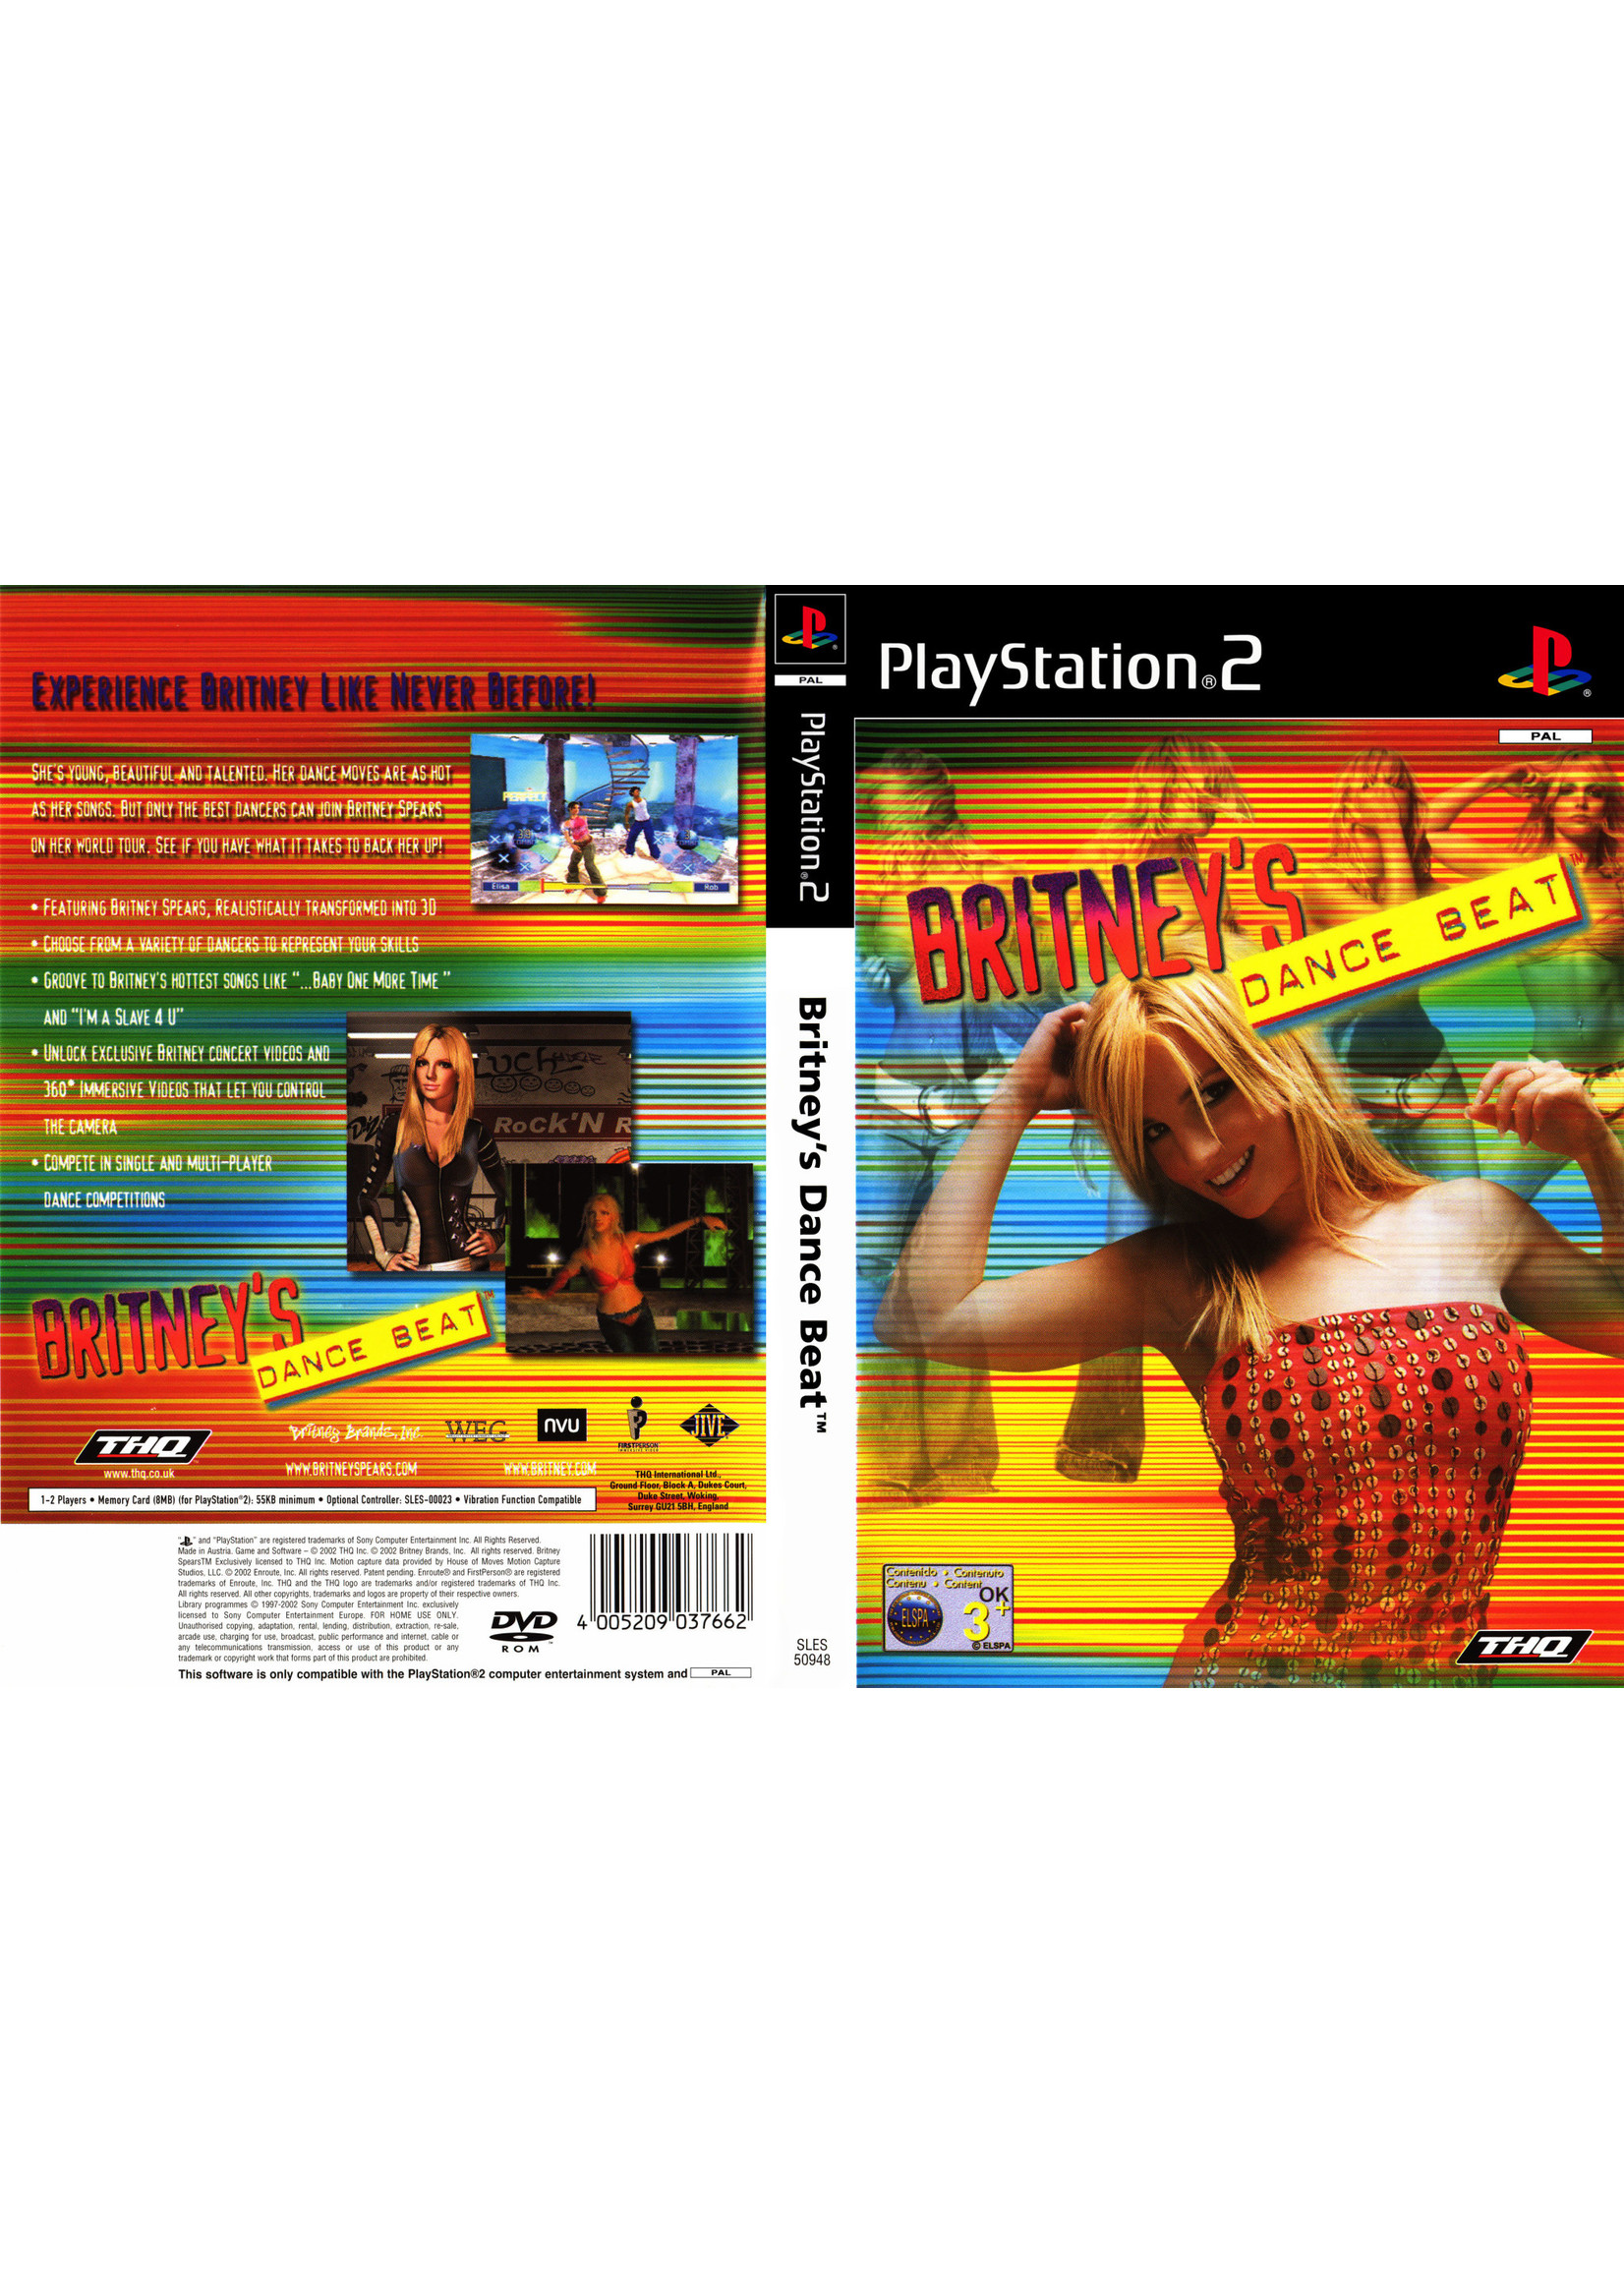 Sony Playstation 2 (PS2) Britney Spears Dance Beat